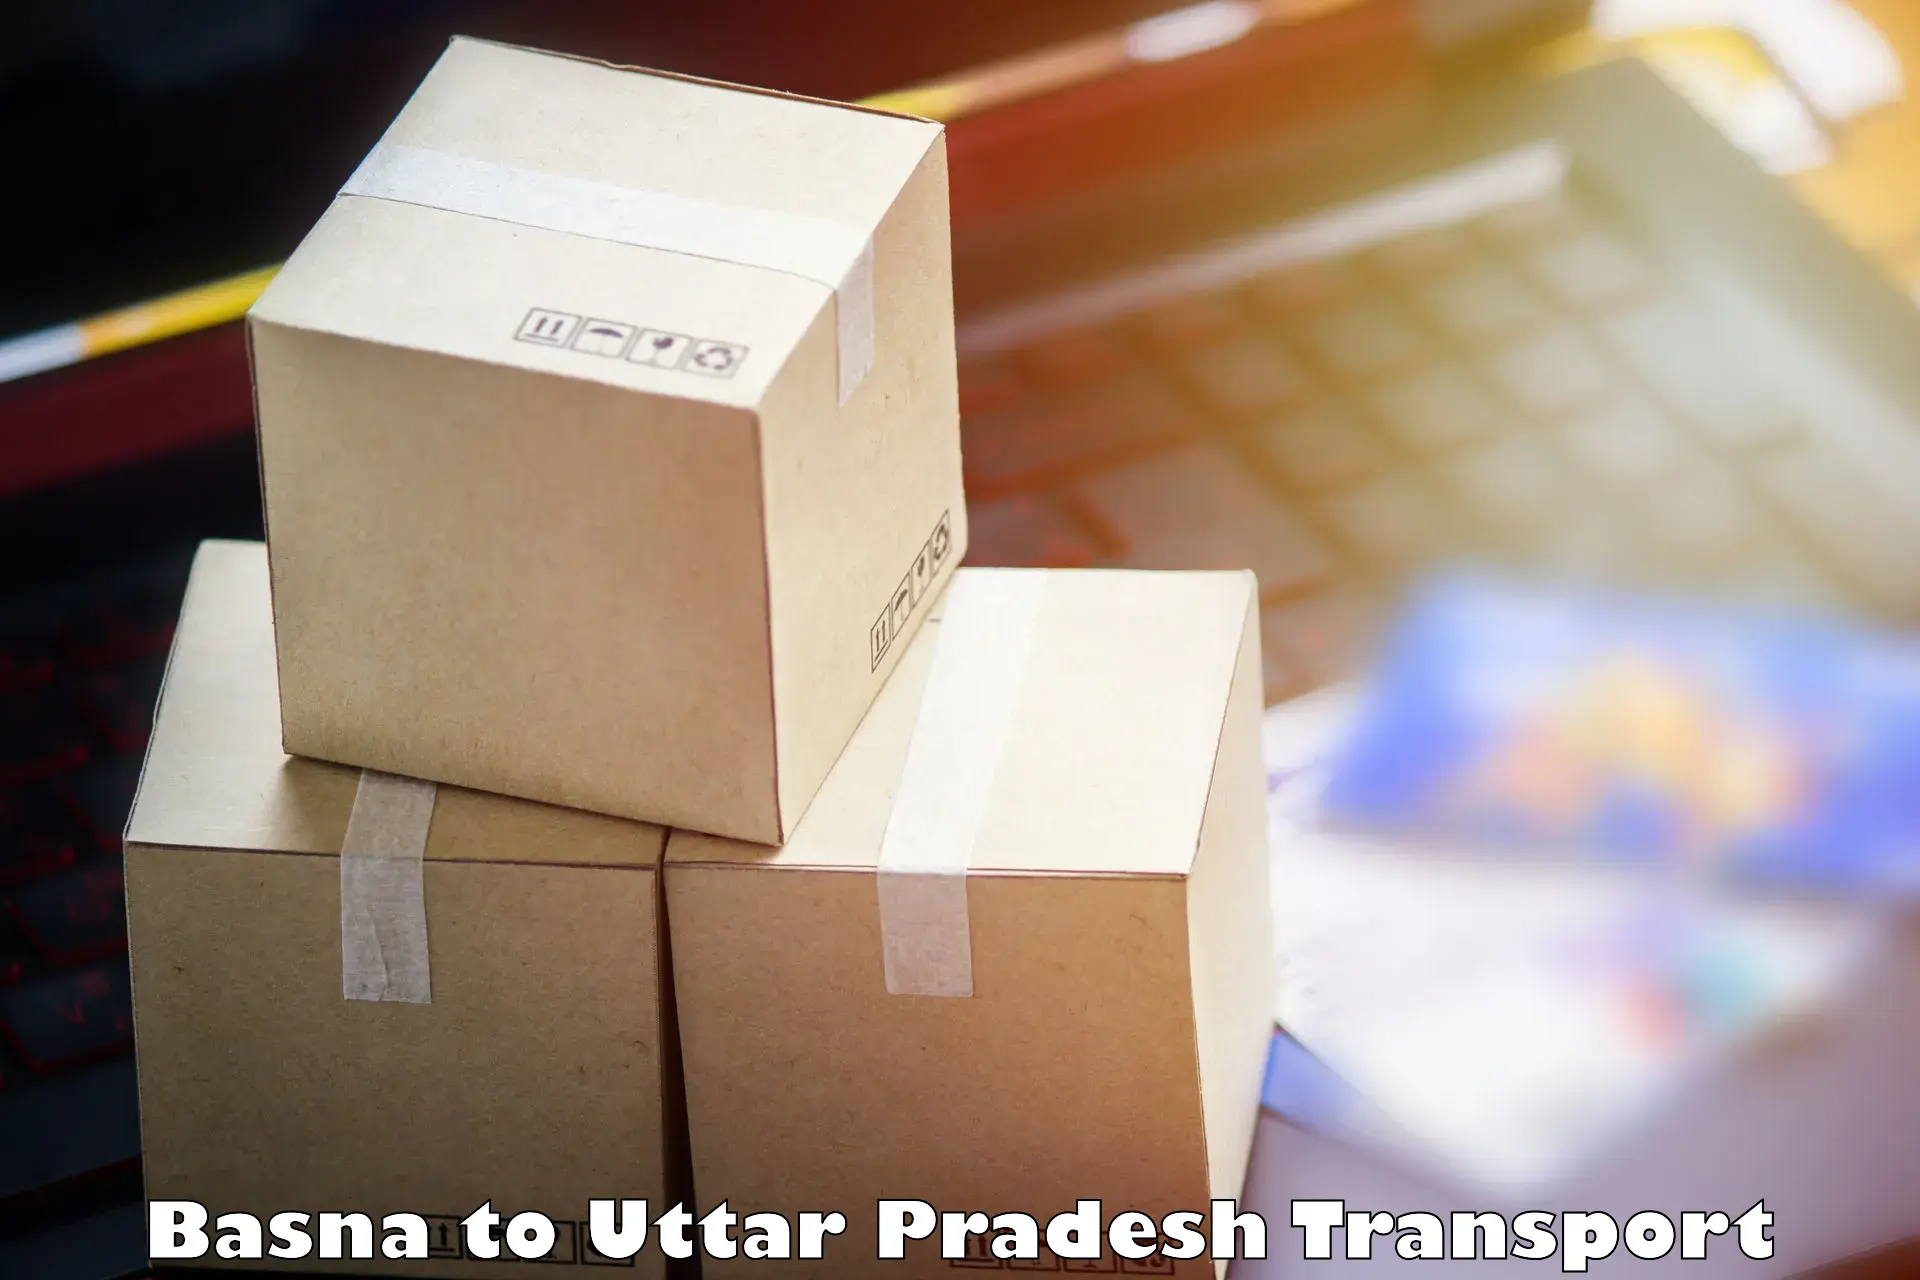 Air freight transport services in Basna to Allahabad